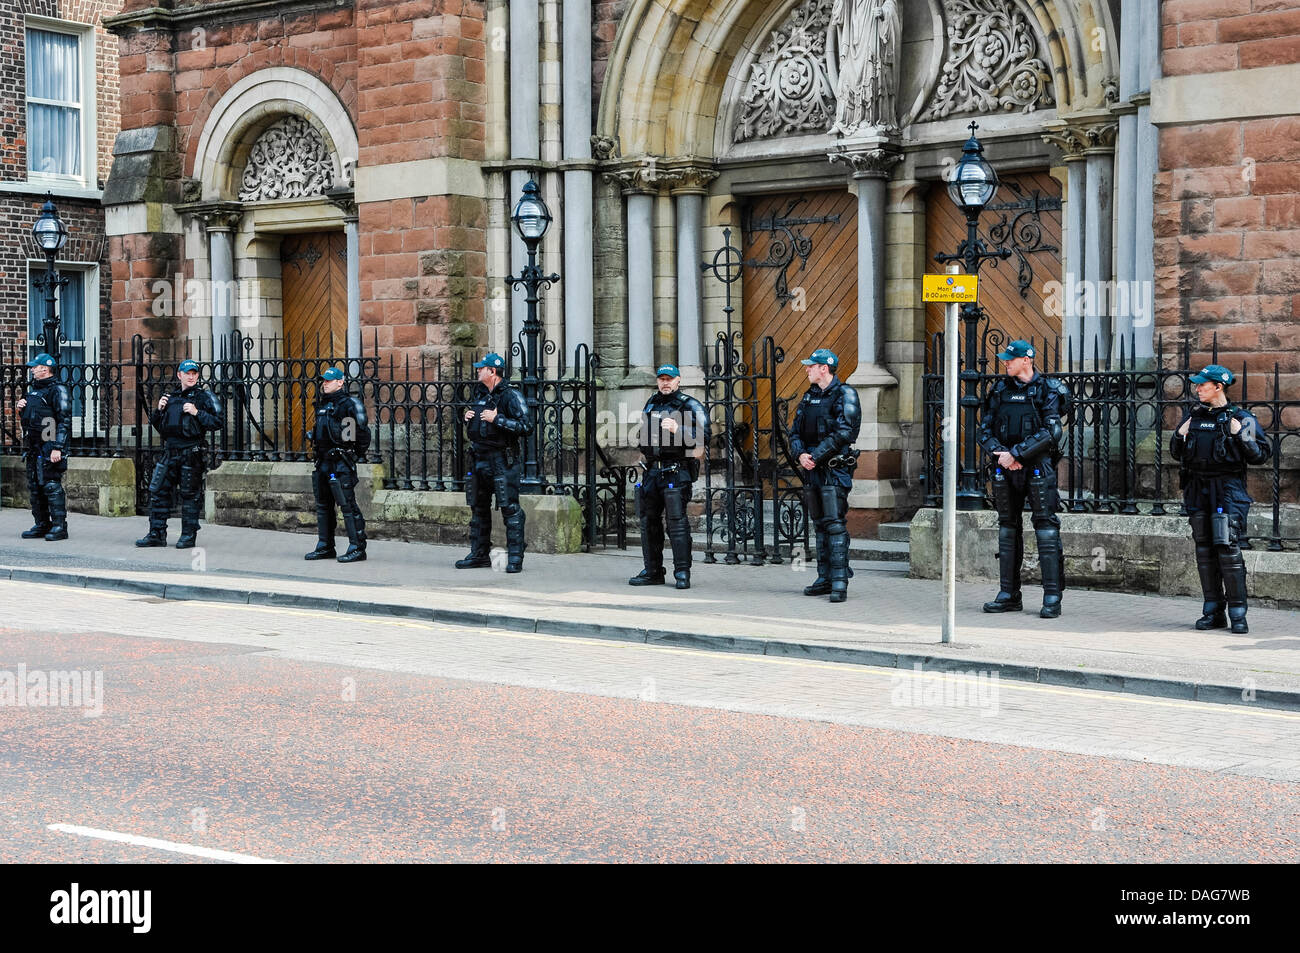 Belfast, Northern Ireland, 12th July 2013 - Police officers stand guard at the Roman Catholic St. Patrick's Church. Credit:  Stephen Barnes/Alamy Live News Stock Photo